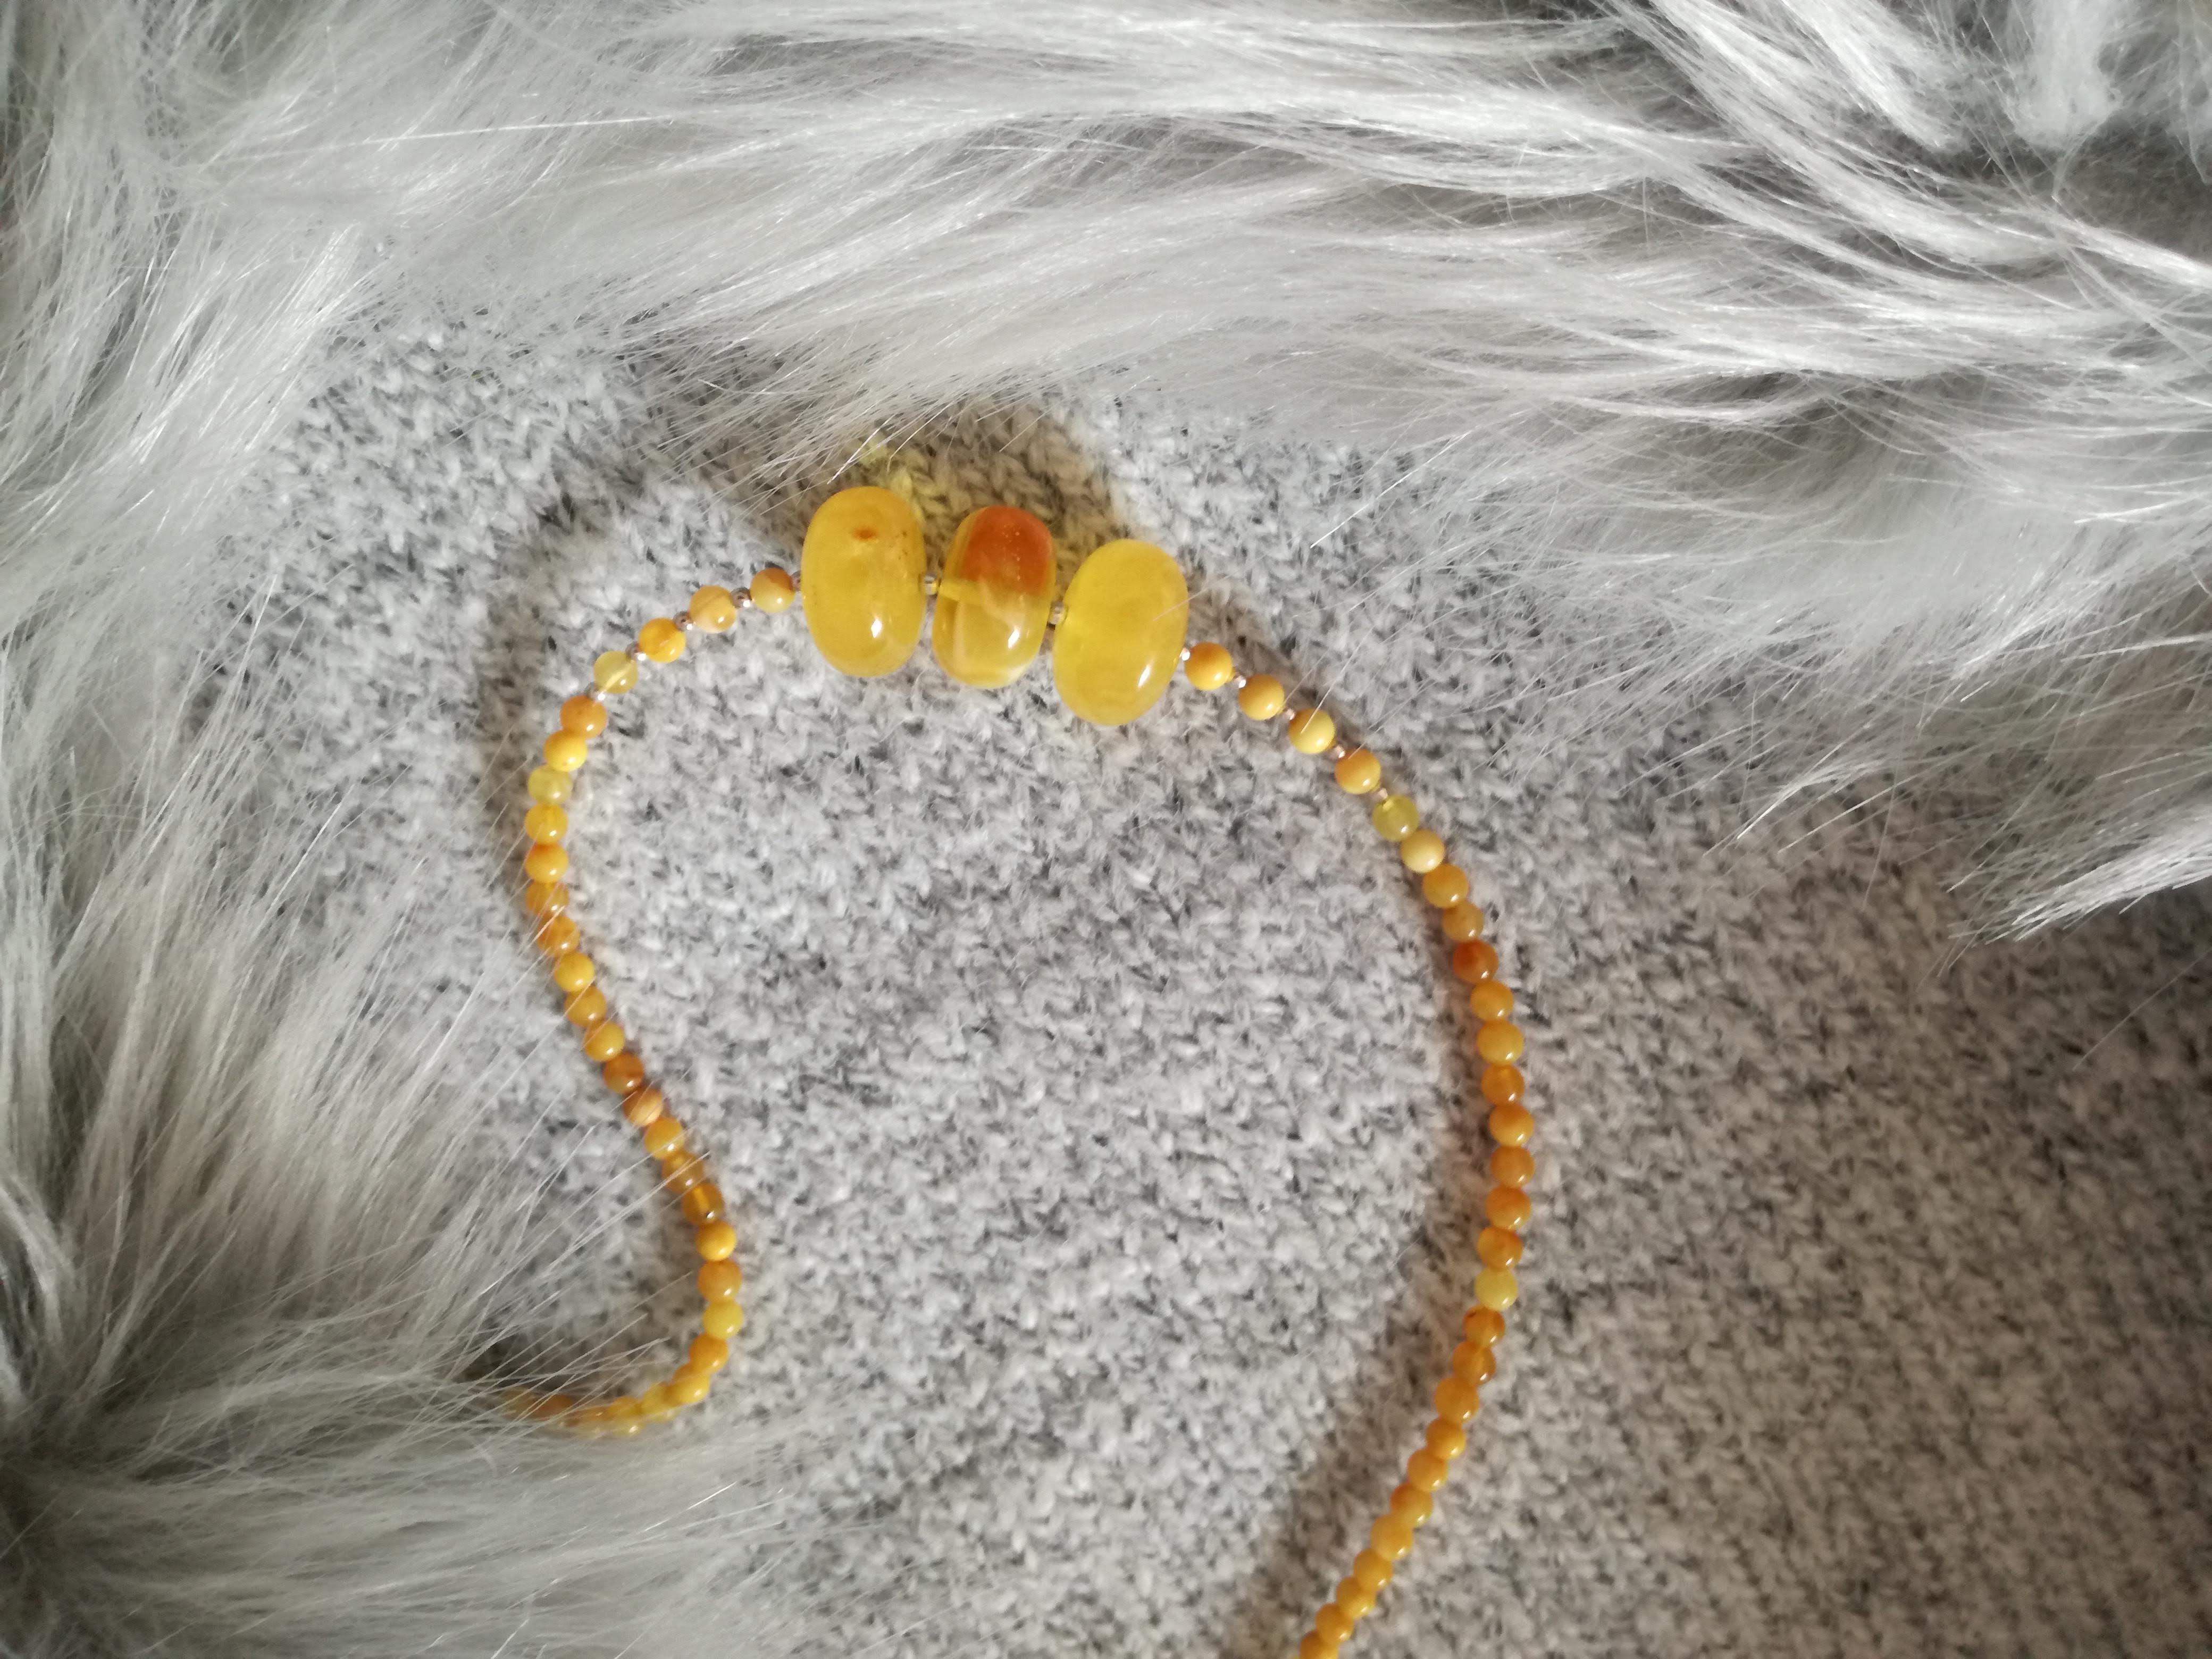 Genuine Handmade Baltic Amber Necklace for Adults, small polished milky beads + three oval lemon amber pieces, Healing properties, Nursing Mums, Gift for Women